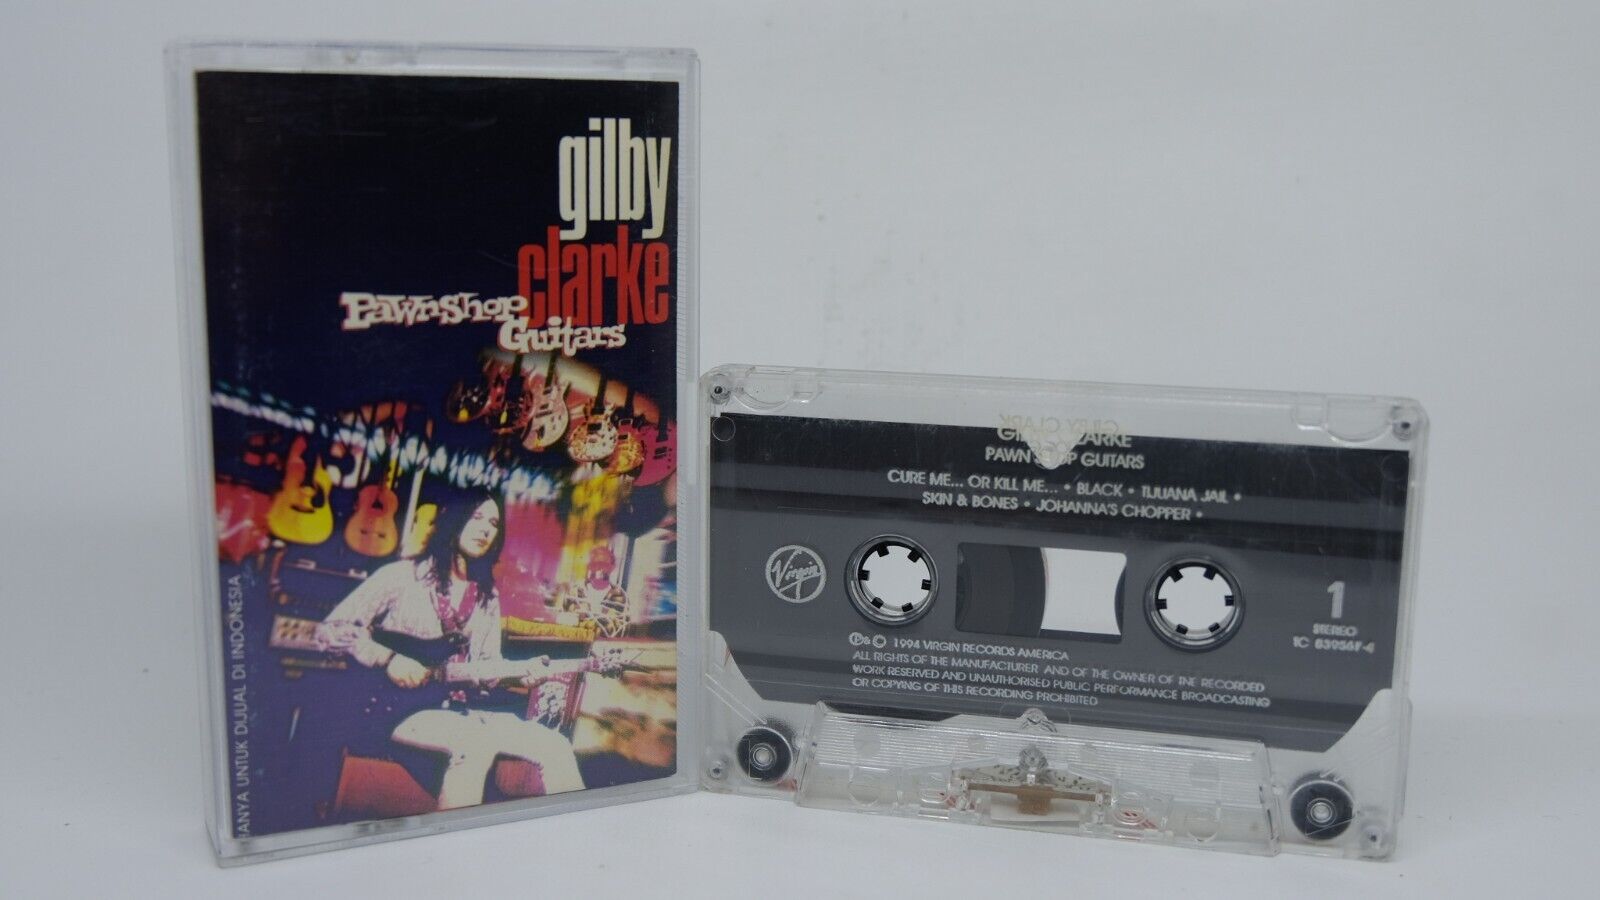 Gilby Clarke Pawnshop Guitars Cassette Tape Indonesia Official Release VGC